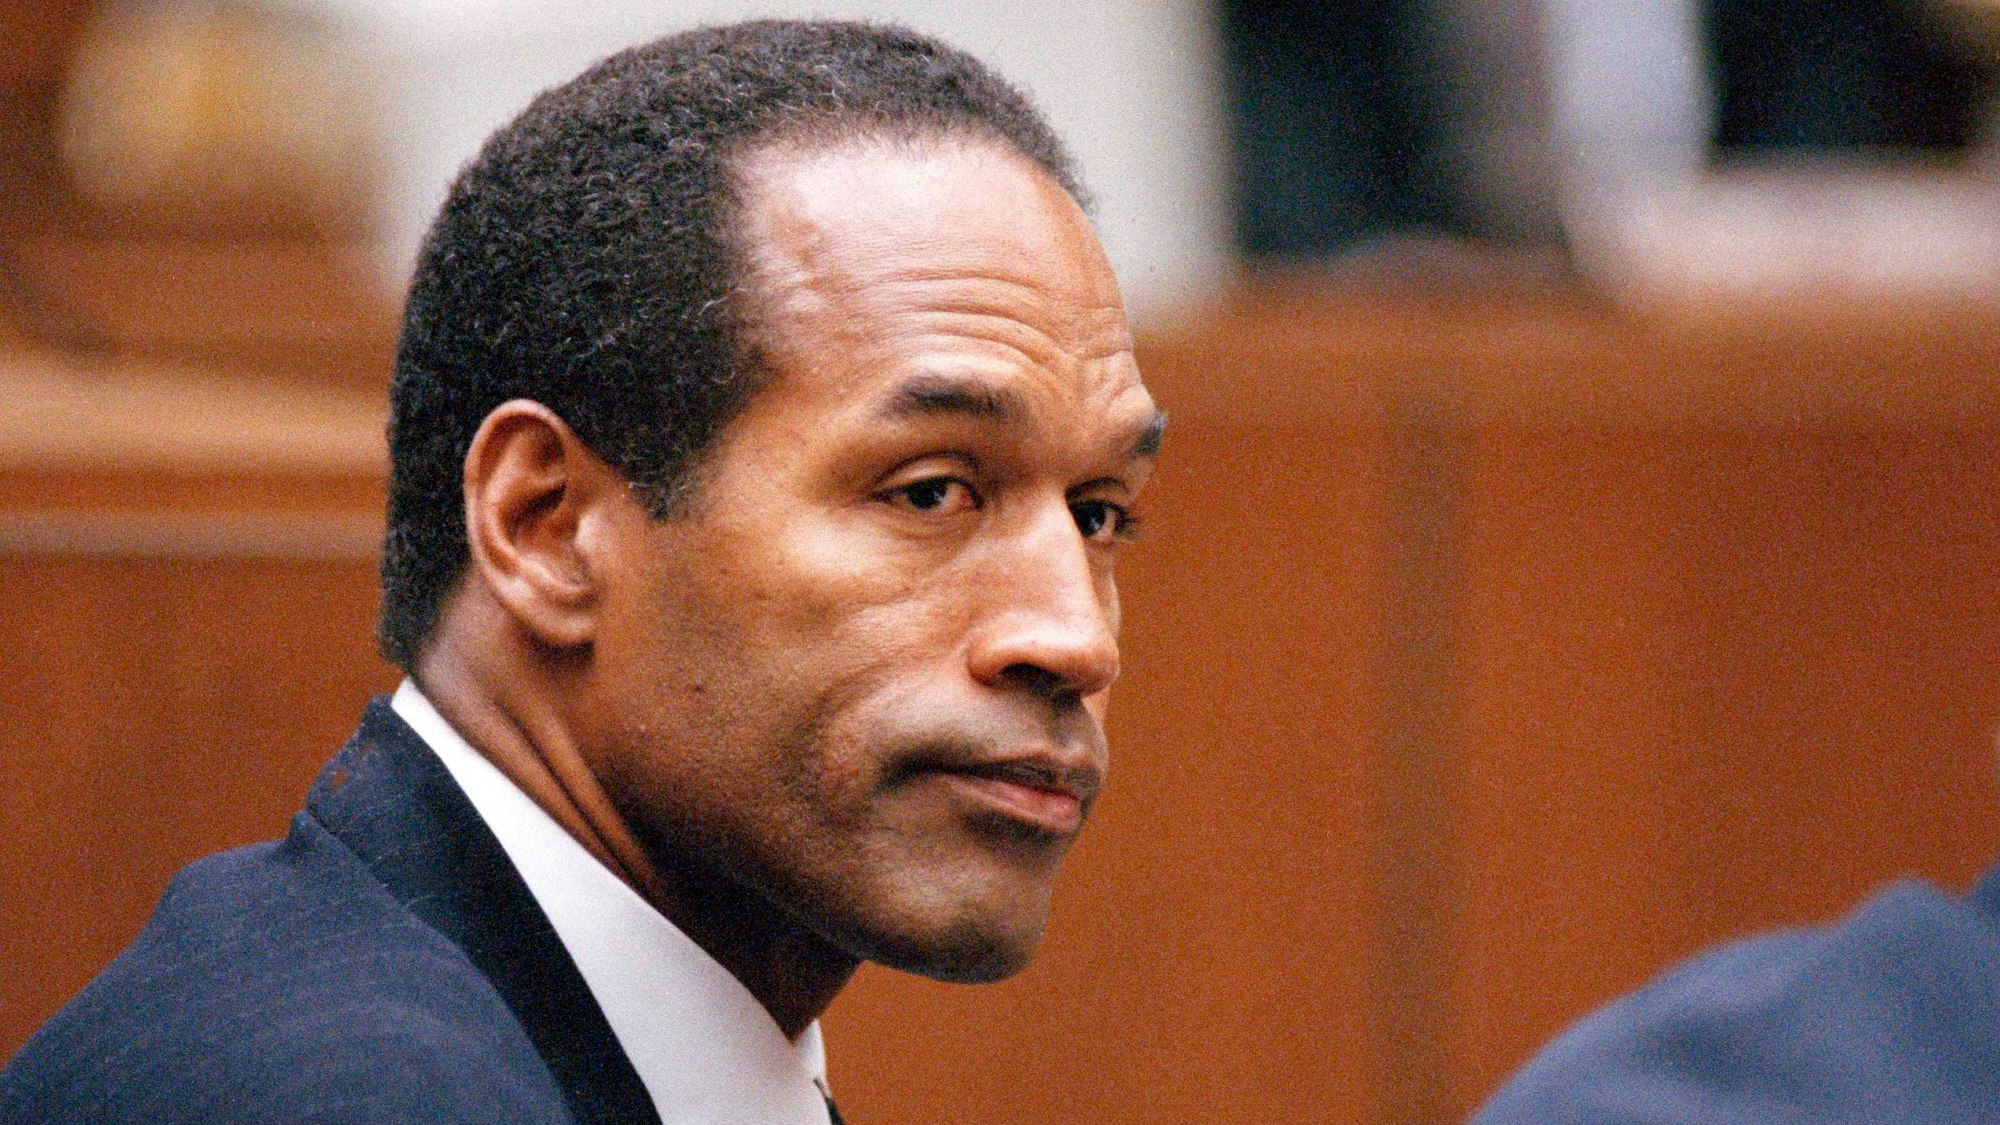 FILE - O.J. Simpson sits at his arraignment in Superior Court in Los Angeles on July 22, 1994. O.J. Simpson's attorney Malcolm LaVergne is now handling the deceased former football star, actor and famous murder defendant's financial estate. (AP Photo/Pool/Lois Bernstein, Pool)